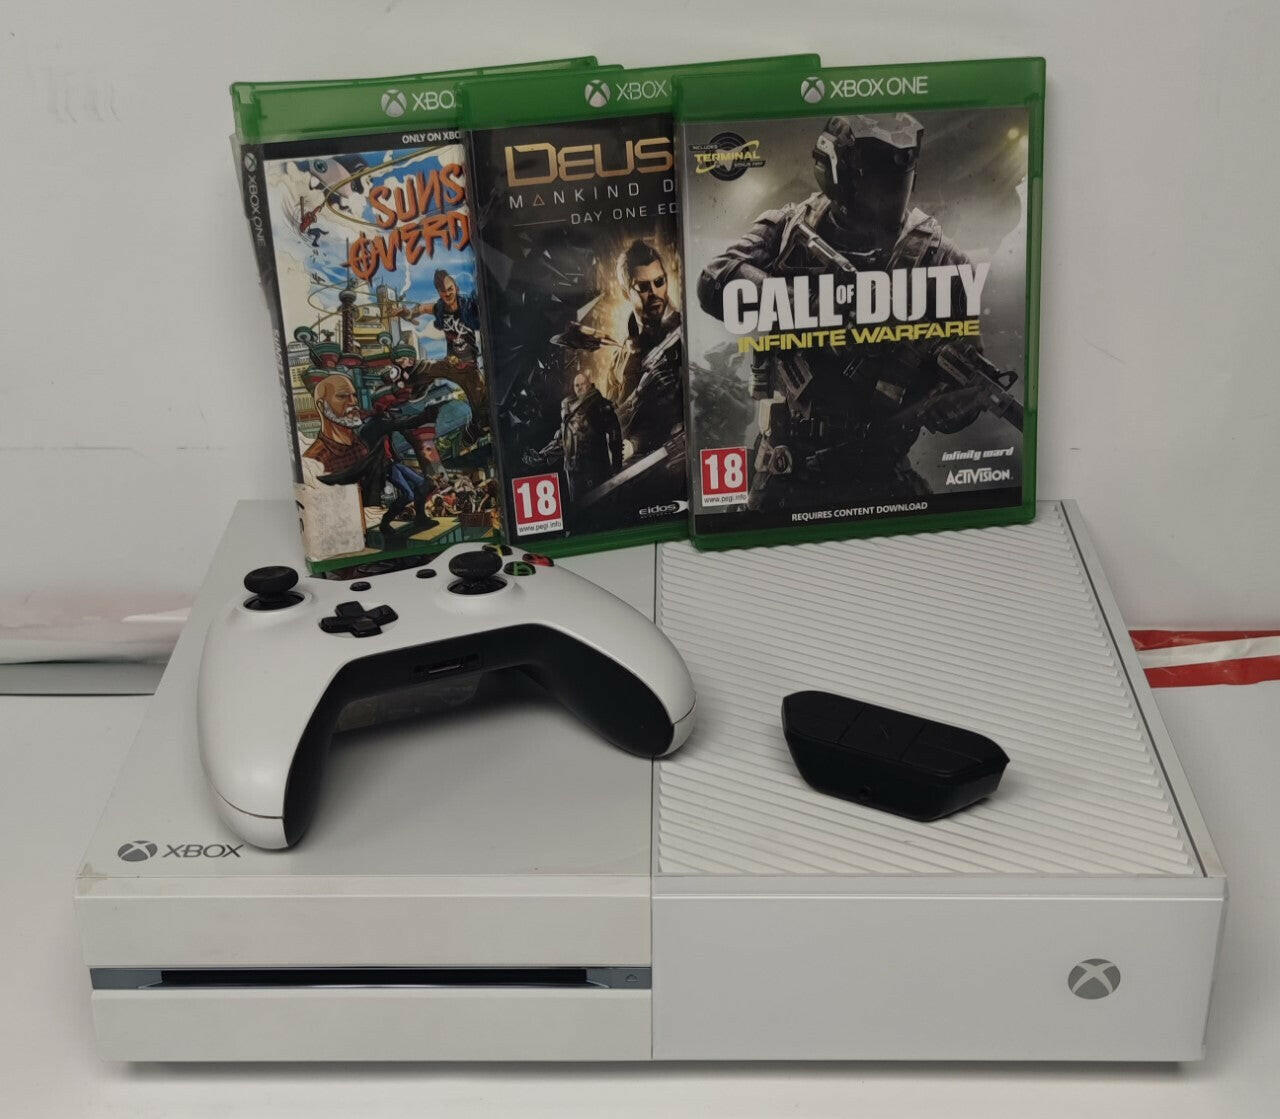 Microsoft Xbox One Day One Edition 500GB Black Console (FACTORY SEALED)